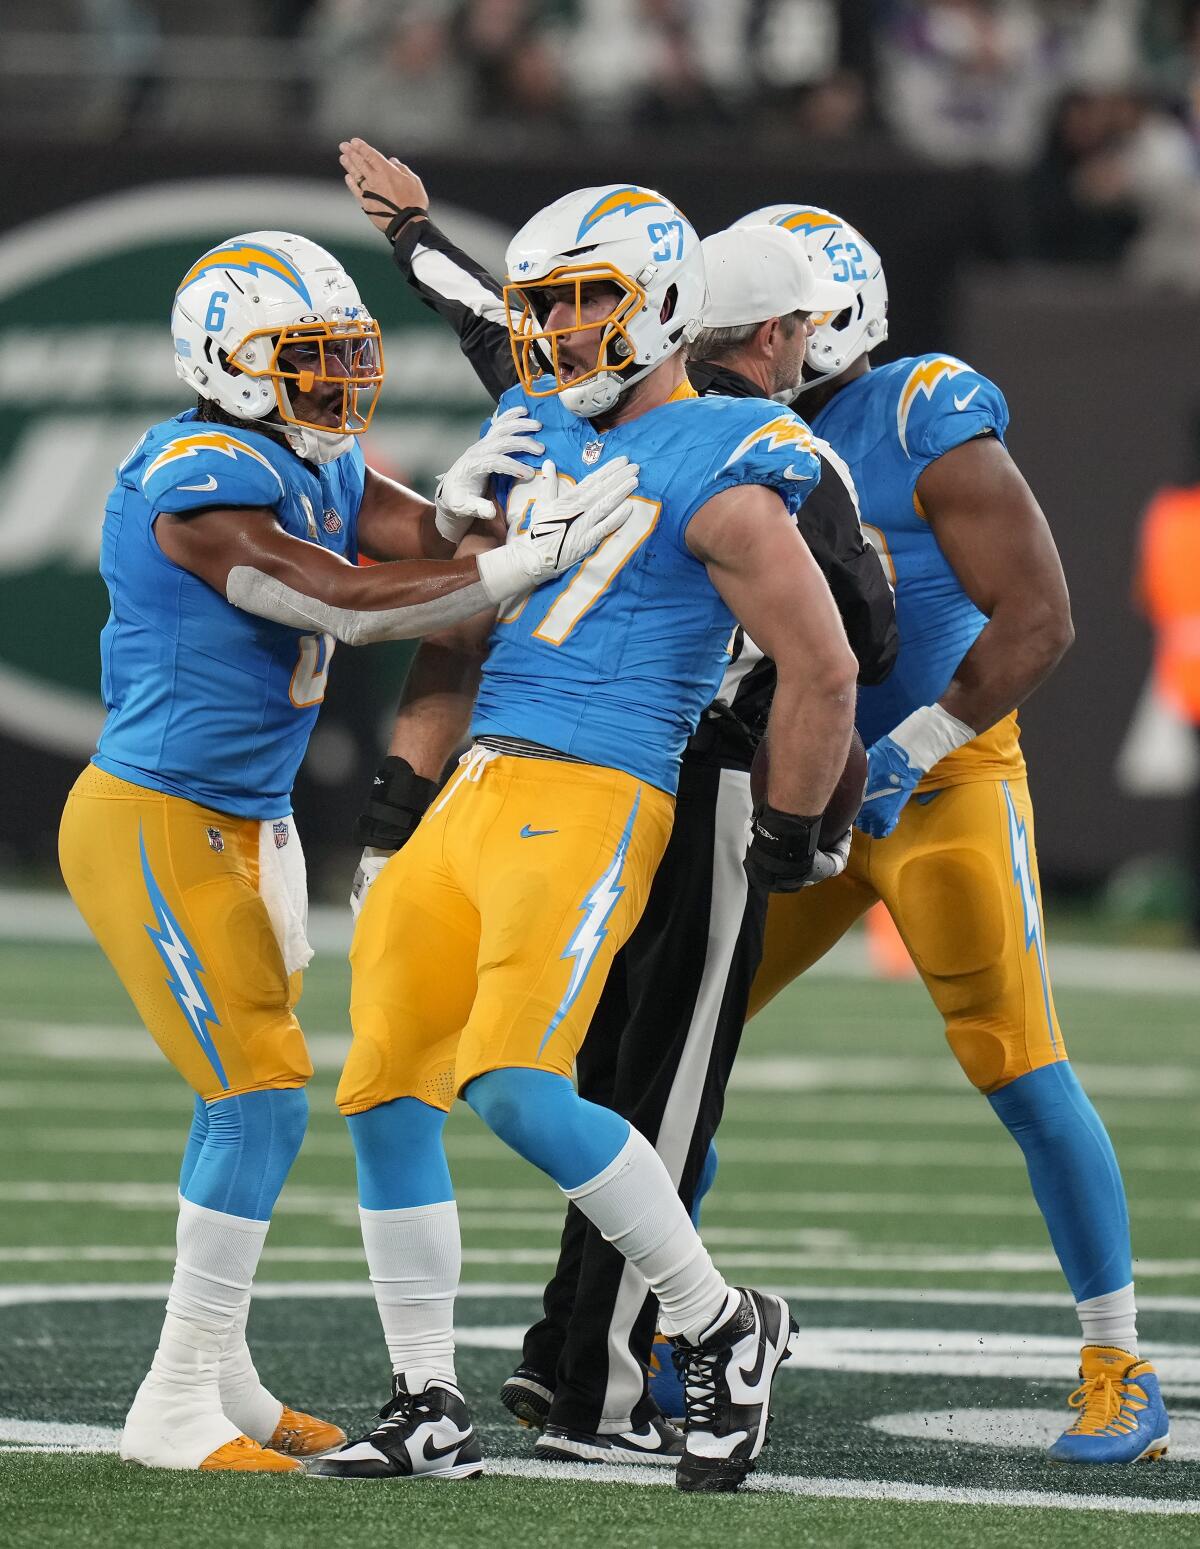 Chargers linebacker Joey Bosa celebrates after recovering a fumble in the first half.